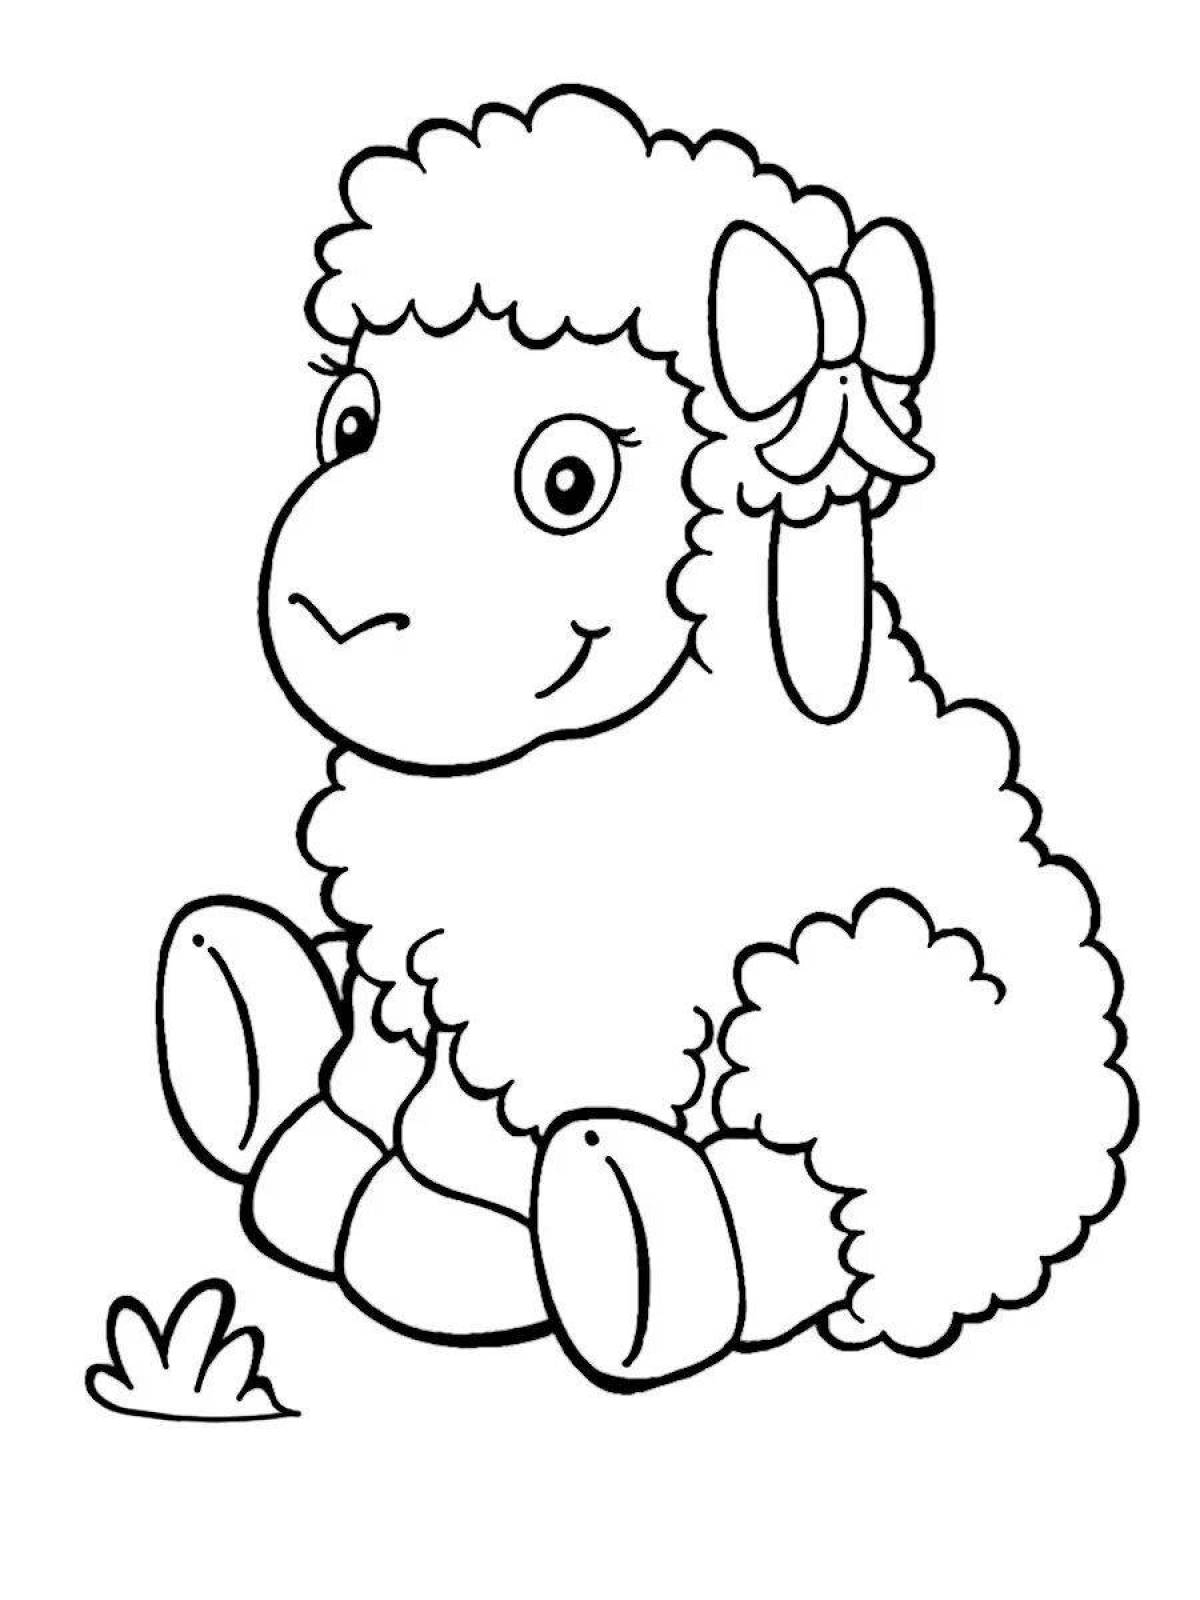 Luminous sheep coloring book for children 3-4 years old